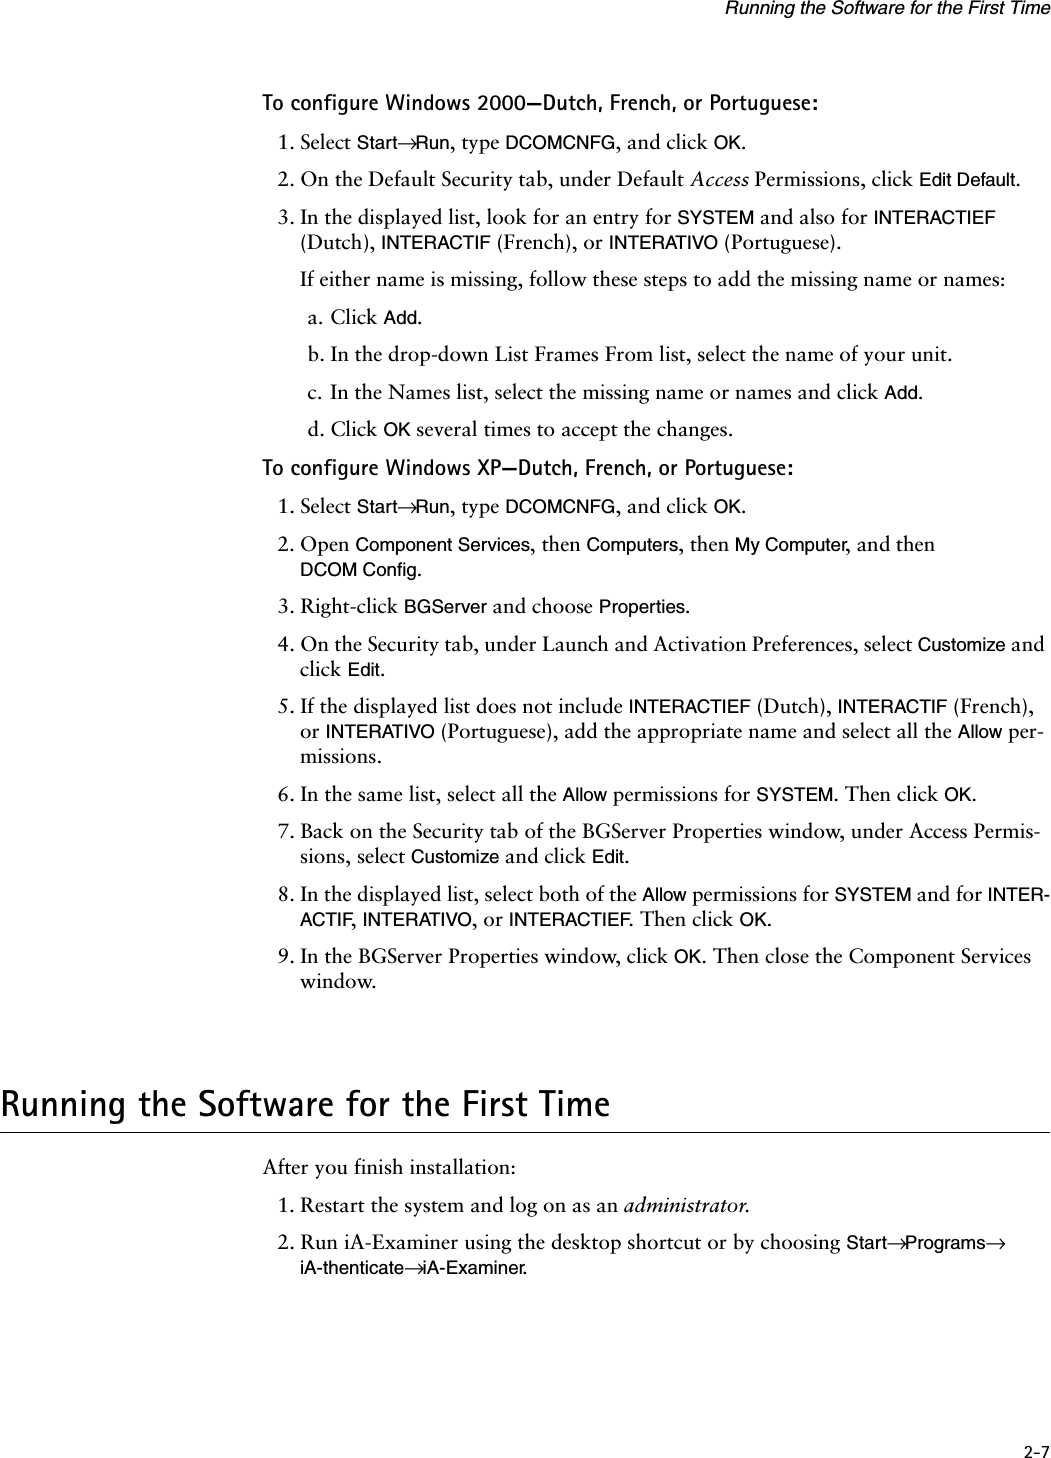 2-7Running the Software for the First TimeTo configure Windows 2000—Dutch, French, or Portuguese:1. Select Start→ Run, type DCOMCNFG, and click OK.2. On the Default Security tab, under Default Access Permissions, click Edit Default.3. In the displayed list, look for an entry for SYSTEM and also for INTERACTIEF (Dutch), INTERACTIF (French), or INTERATIVO (Portuguese).If either name is missing, follow these steps to add the missing name or names:a. Click Add.b. In the drop-down List Frames From list, select the name of your unit.c. In the Names list, select the missing name or names and click Add.d. Click OK several times to accept the changes.To configure Windows XP—Dutch, French, or Portuguese:1. Select Start→ Run, type DCOMCNFG, and click OK.2. Open Component Services, then Computers, then My Computer, and then DCOM Config.3. Right-click BGServer and choose Properties.4. On the Security tab, under Launch and Activation Preferences, select Customize and click Edit.5. If the displayed list does not include INTERACTIEF (Dutch), INTERACTIF (French), or INTERATIVO (Portuguese), add the appropriate name and select all the Allow per-missions.6. In the same list, select all the Allow permissions for SYSTEM. Then click OK.7. Back on the Security tab of the BGServer Properties window, under Access Permis-sions, select Customize and click Edit.8. In the displayed list, select both of the Allow permissions for SYSTEM and for INTER-ACTIF, INTERATIVO, or INTERACTIEF. Then click OK.9. In the BGServer Properties window, click OK. Then close the Component Services window.Running the Software for the First TimeAfter you finish installation:1. Restart the system and log on as an administrator.2. Run iA-Examiner using the desktop shortcut or by choosing Start→ Programs→ iA-thenticate→ iA-Examiner.